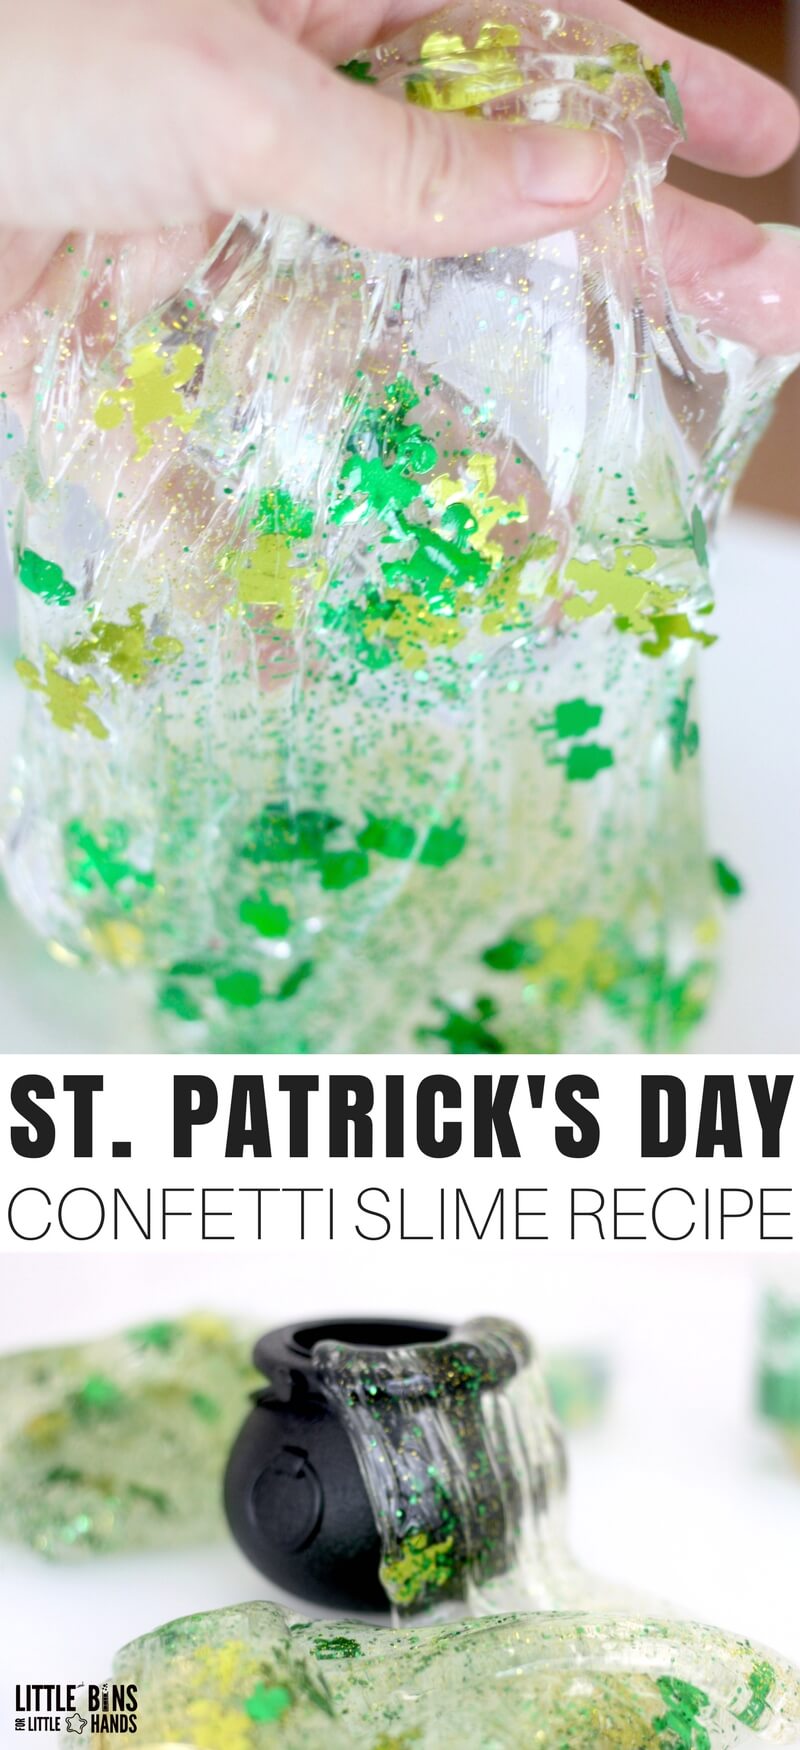 Homemade slime for St Patricks Day! Try our easy to make St Patricks Day slime recipe filled with leprechaun confetti and glitter!